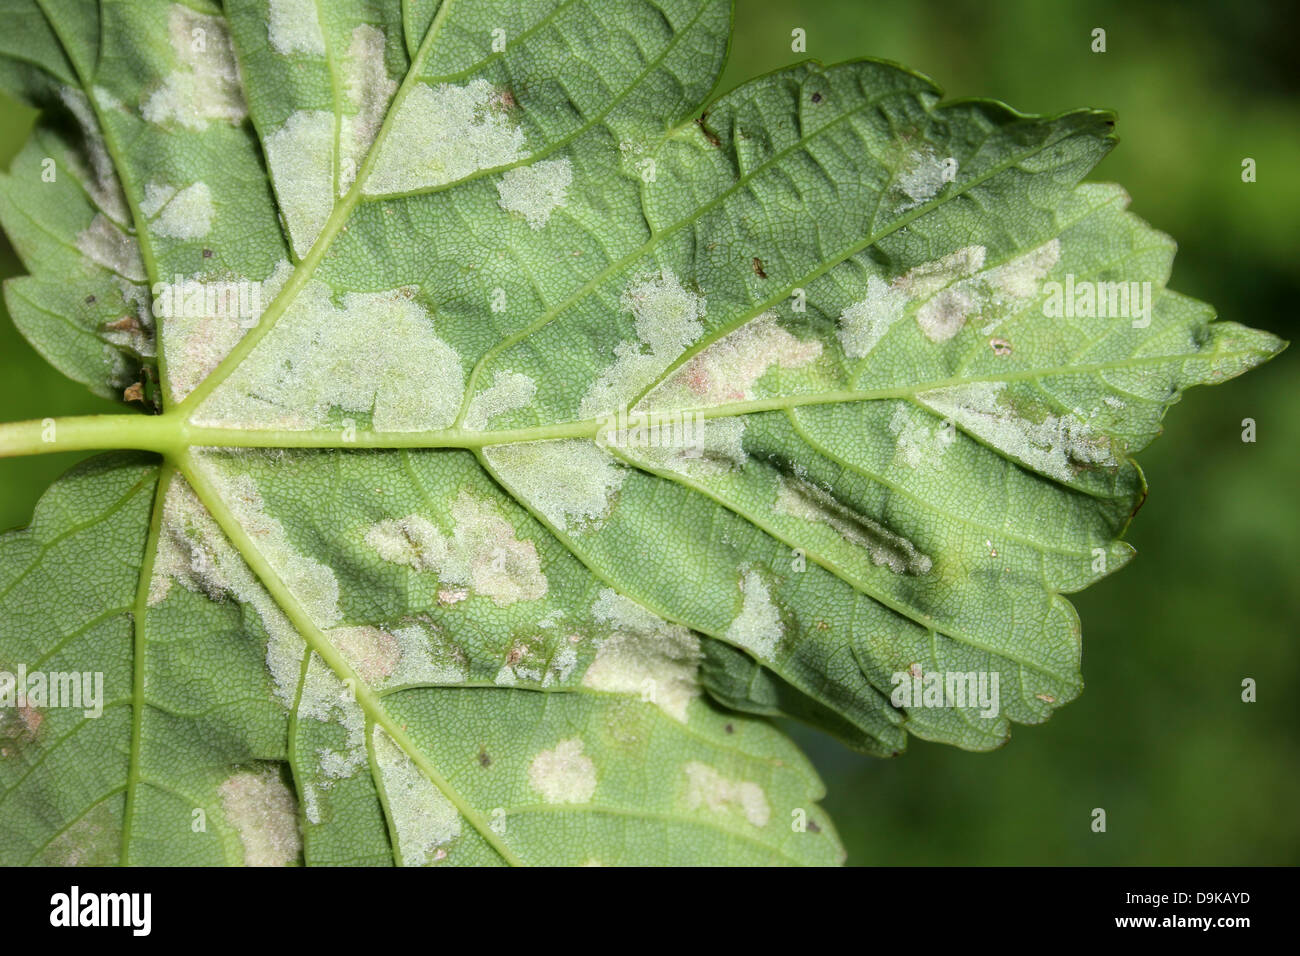 Sycamore leaves affected by Felt Galls caused by the Gall Mite Aceria pseudoplatani Stock Photo